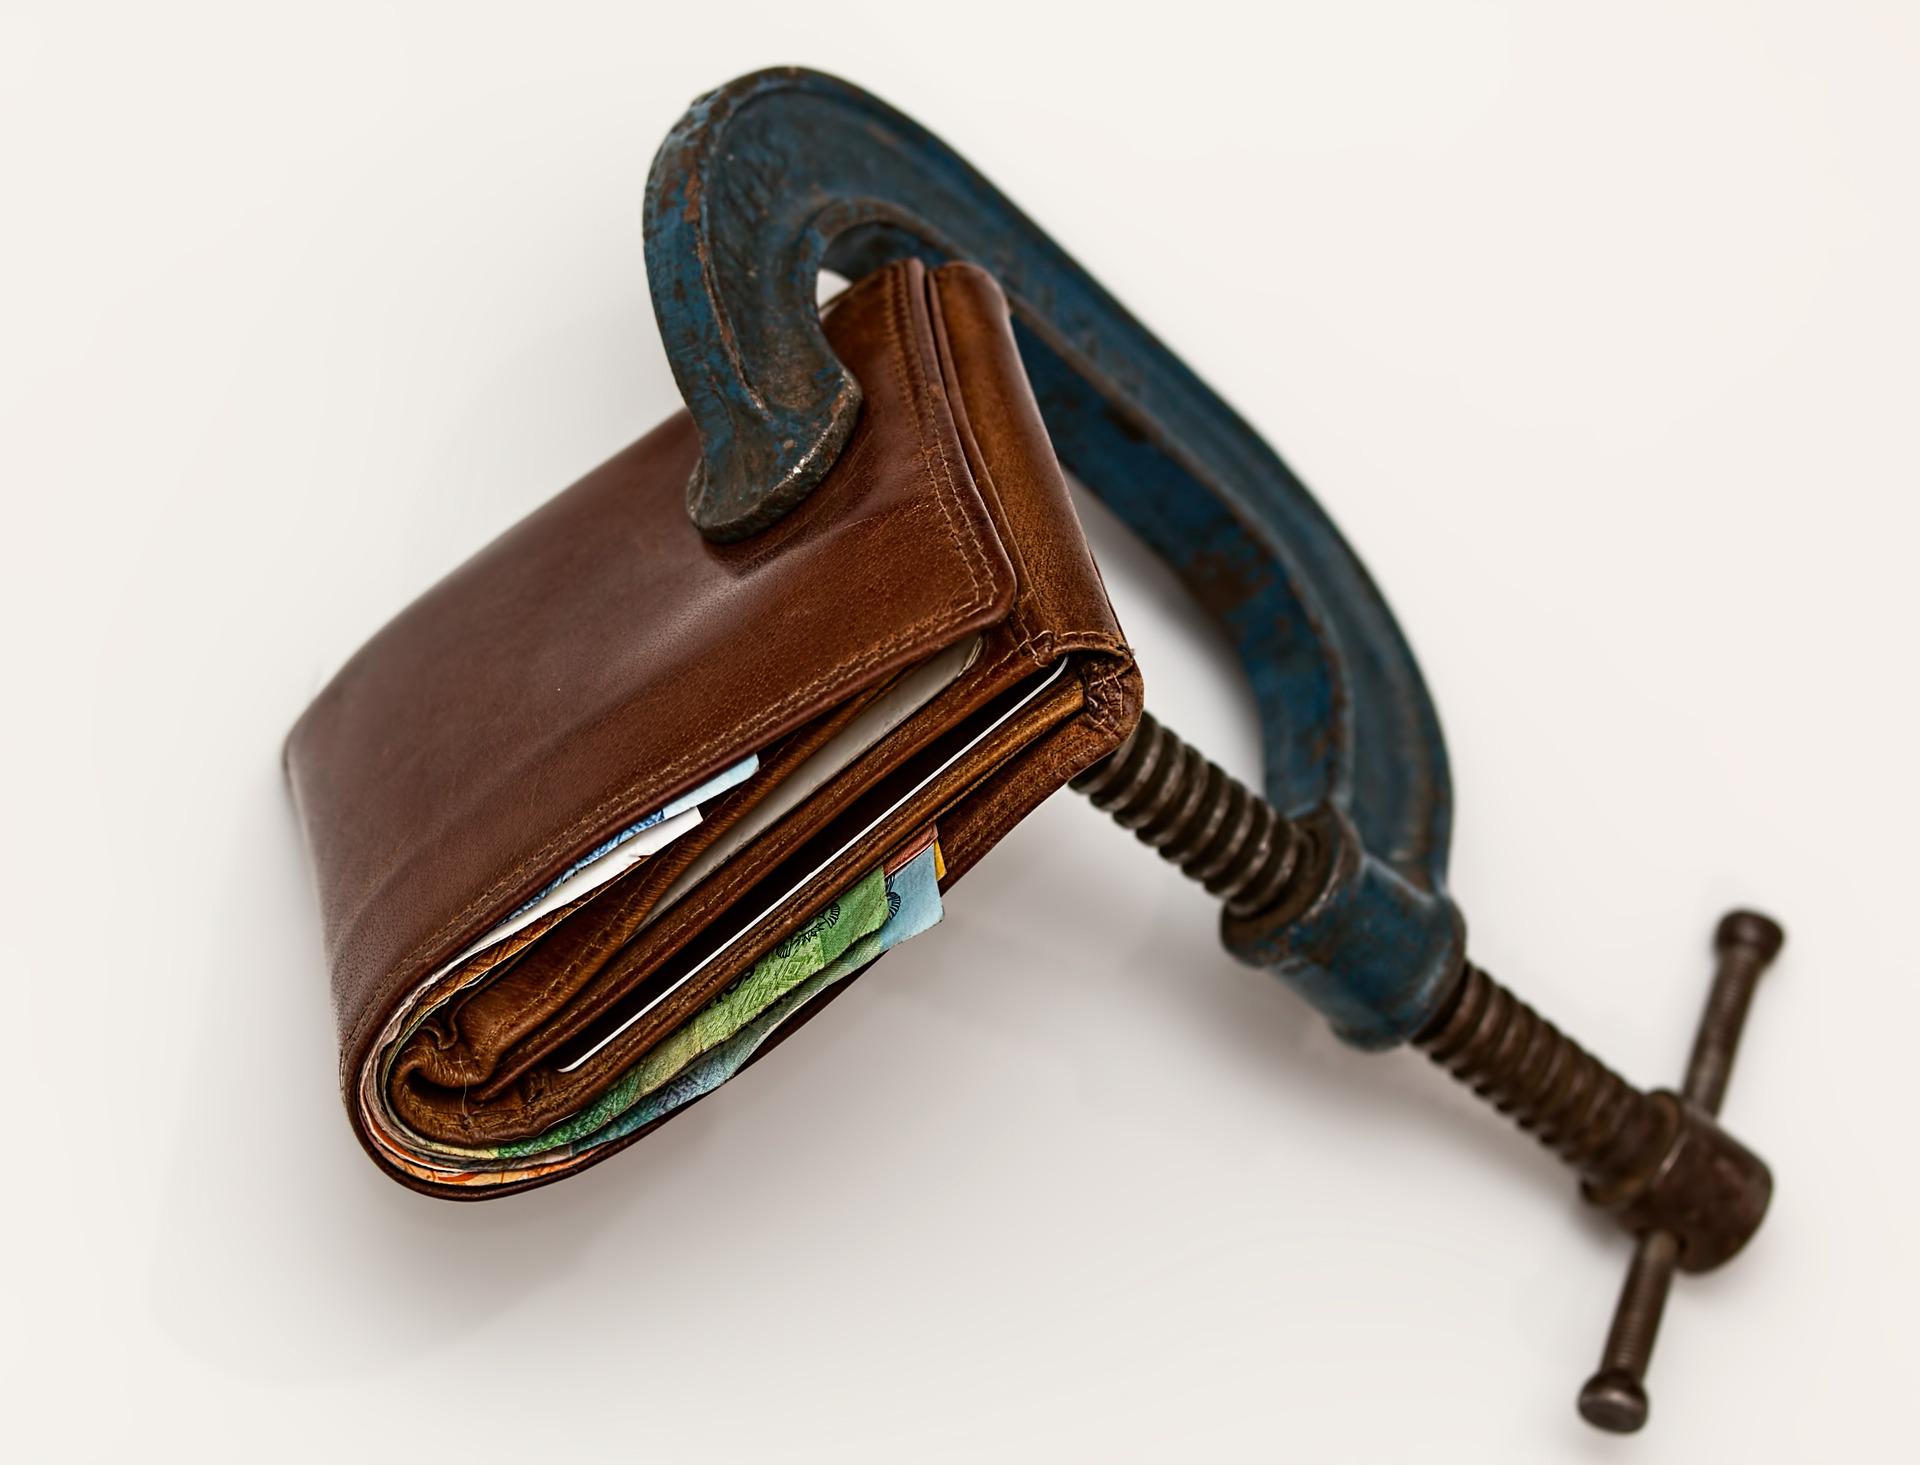 A wallet being compressed with a vice grip